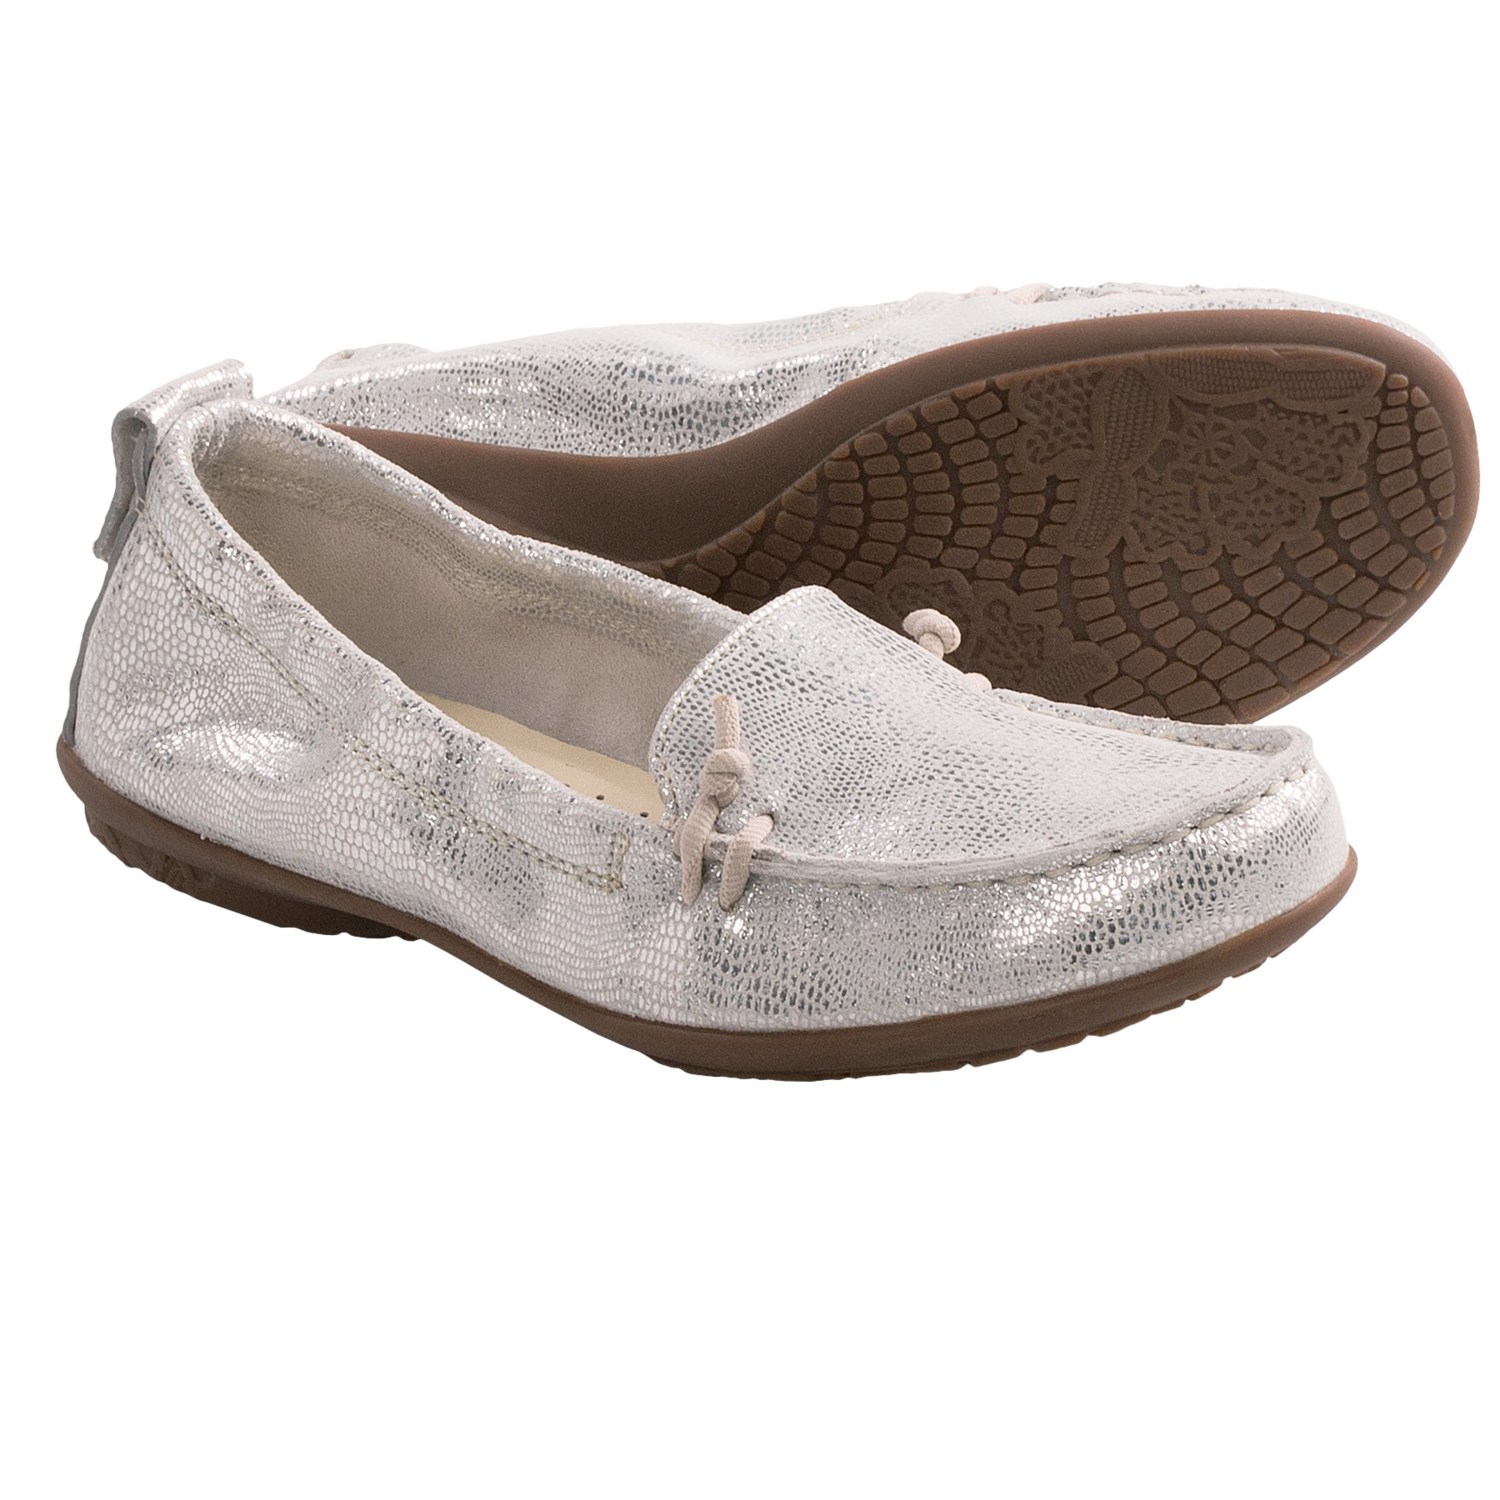 Hush Puppies Ceil Shoes - Slip-Ons (For Women) - Save 35%